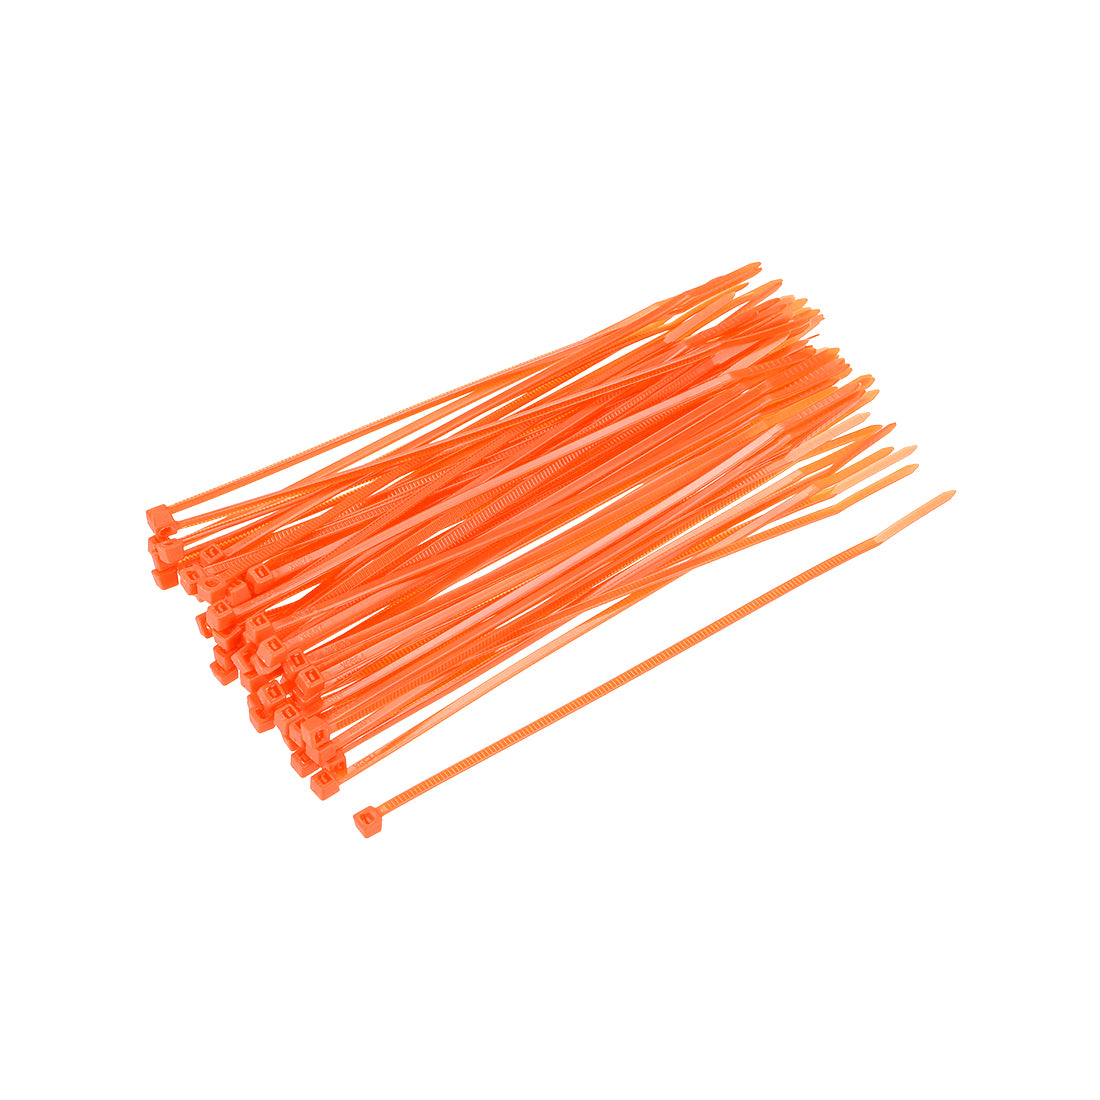 uxcell Uxcell Cable Zip Ties 150mmx2.5mm Self-Locking Nylon Tie Wraps Orange 120pcs